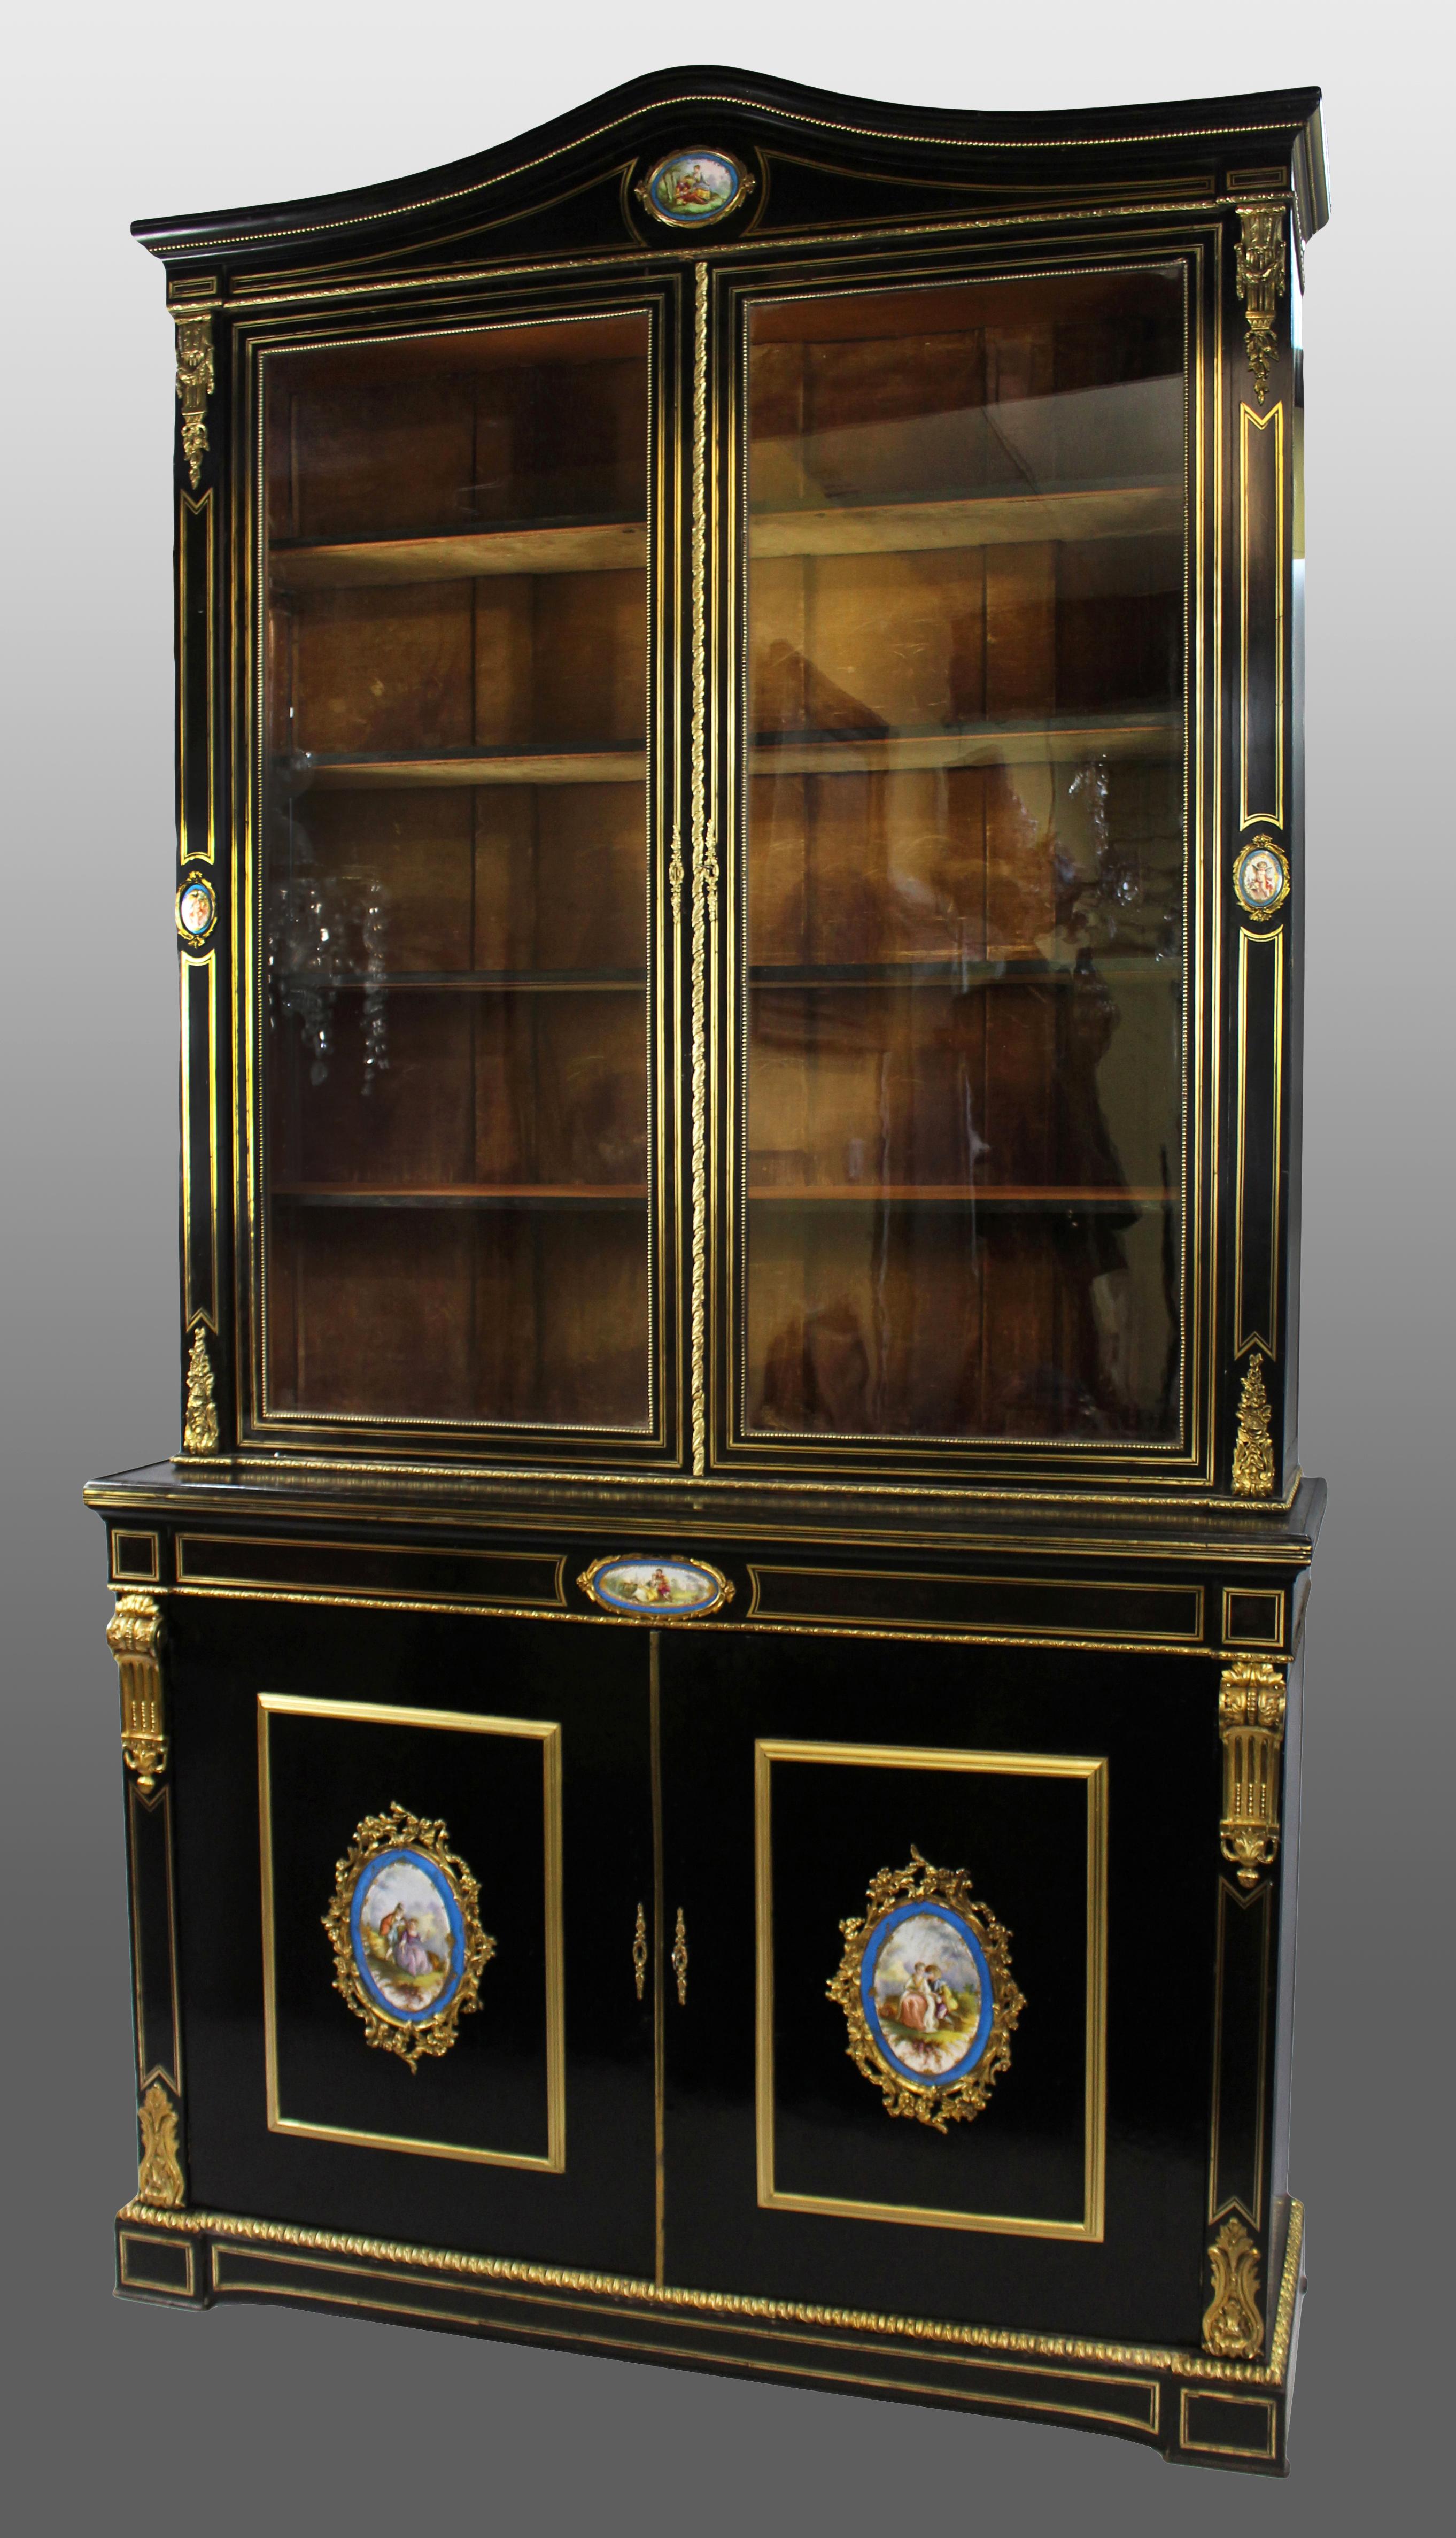 French brass inlaid ebonized bookcase with Sevres plaques c.1820


Measures: Width 138 cm 54 1/2 in
Depth 45 cm 17 3/4 in
Height 260 cm 8 ft 6 /2 in
 

Period c.1820, French

Wood Black lacquer, brass inlaid, porcelain plaques

Condition